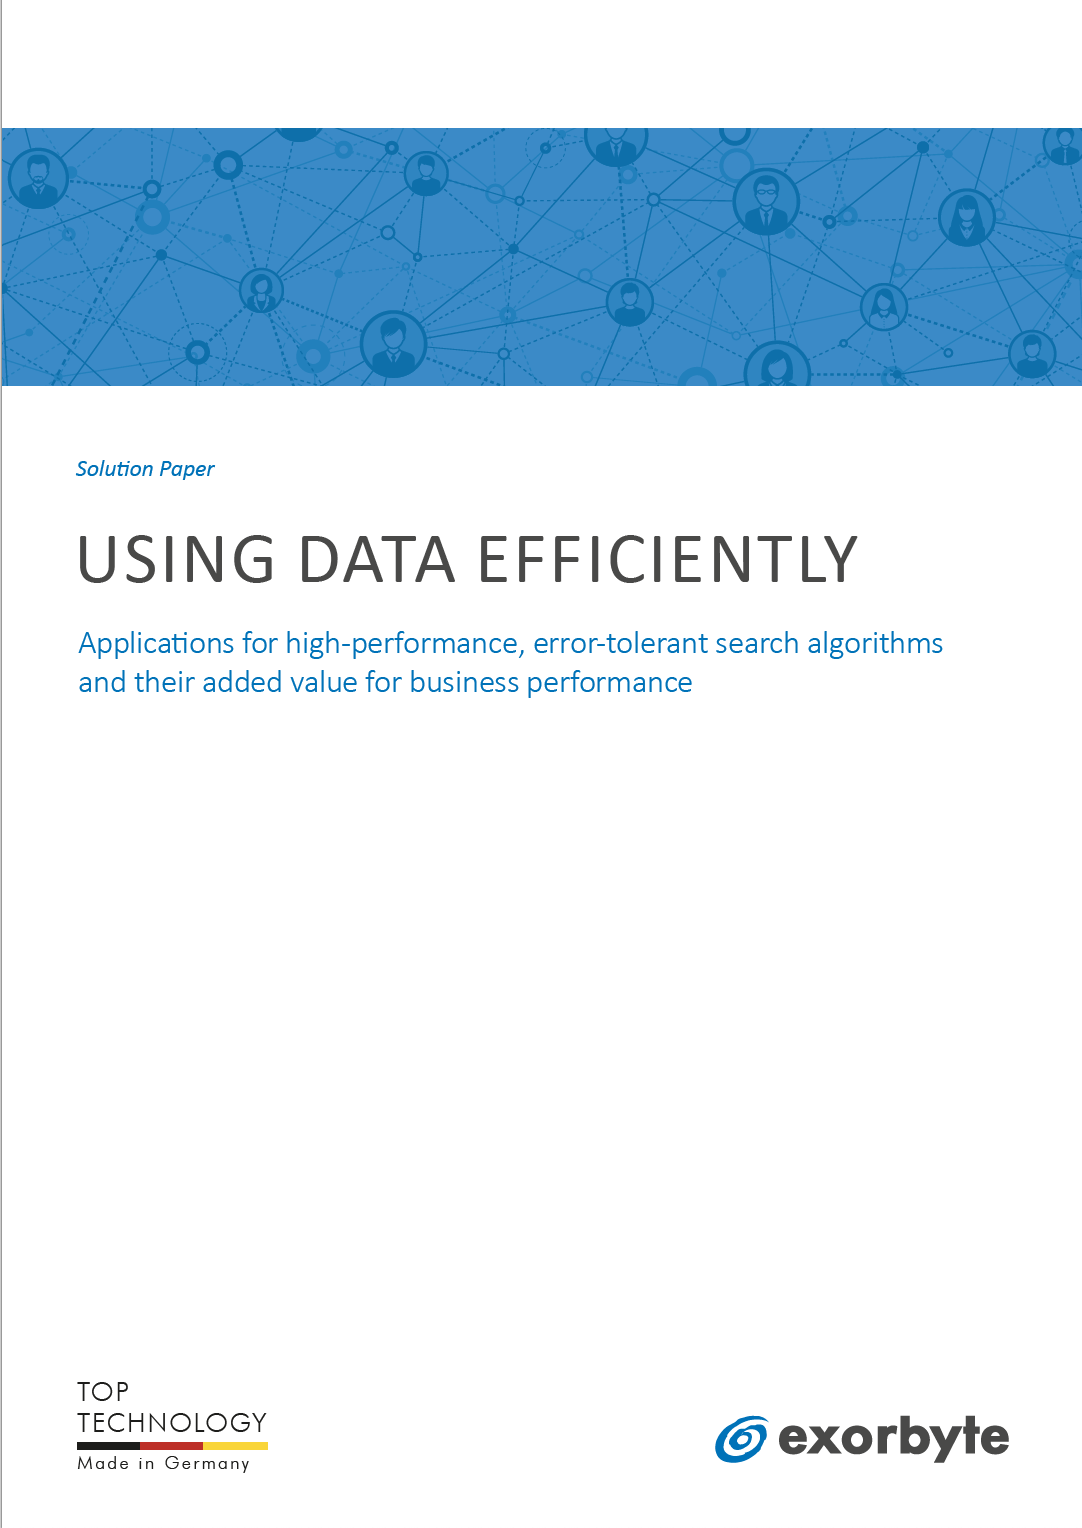 Cover_Solution paper_Using data efficiently.png